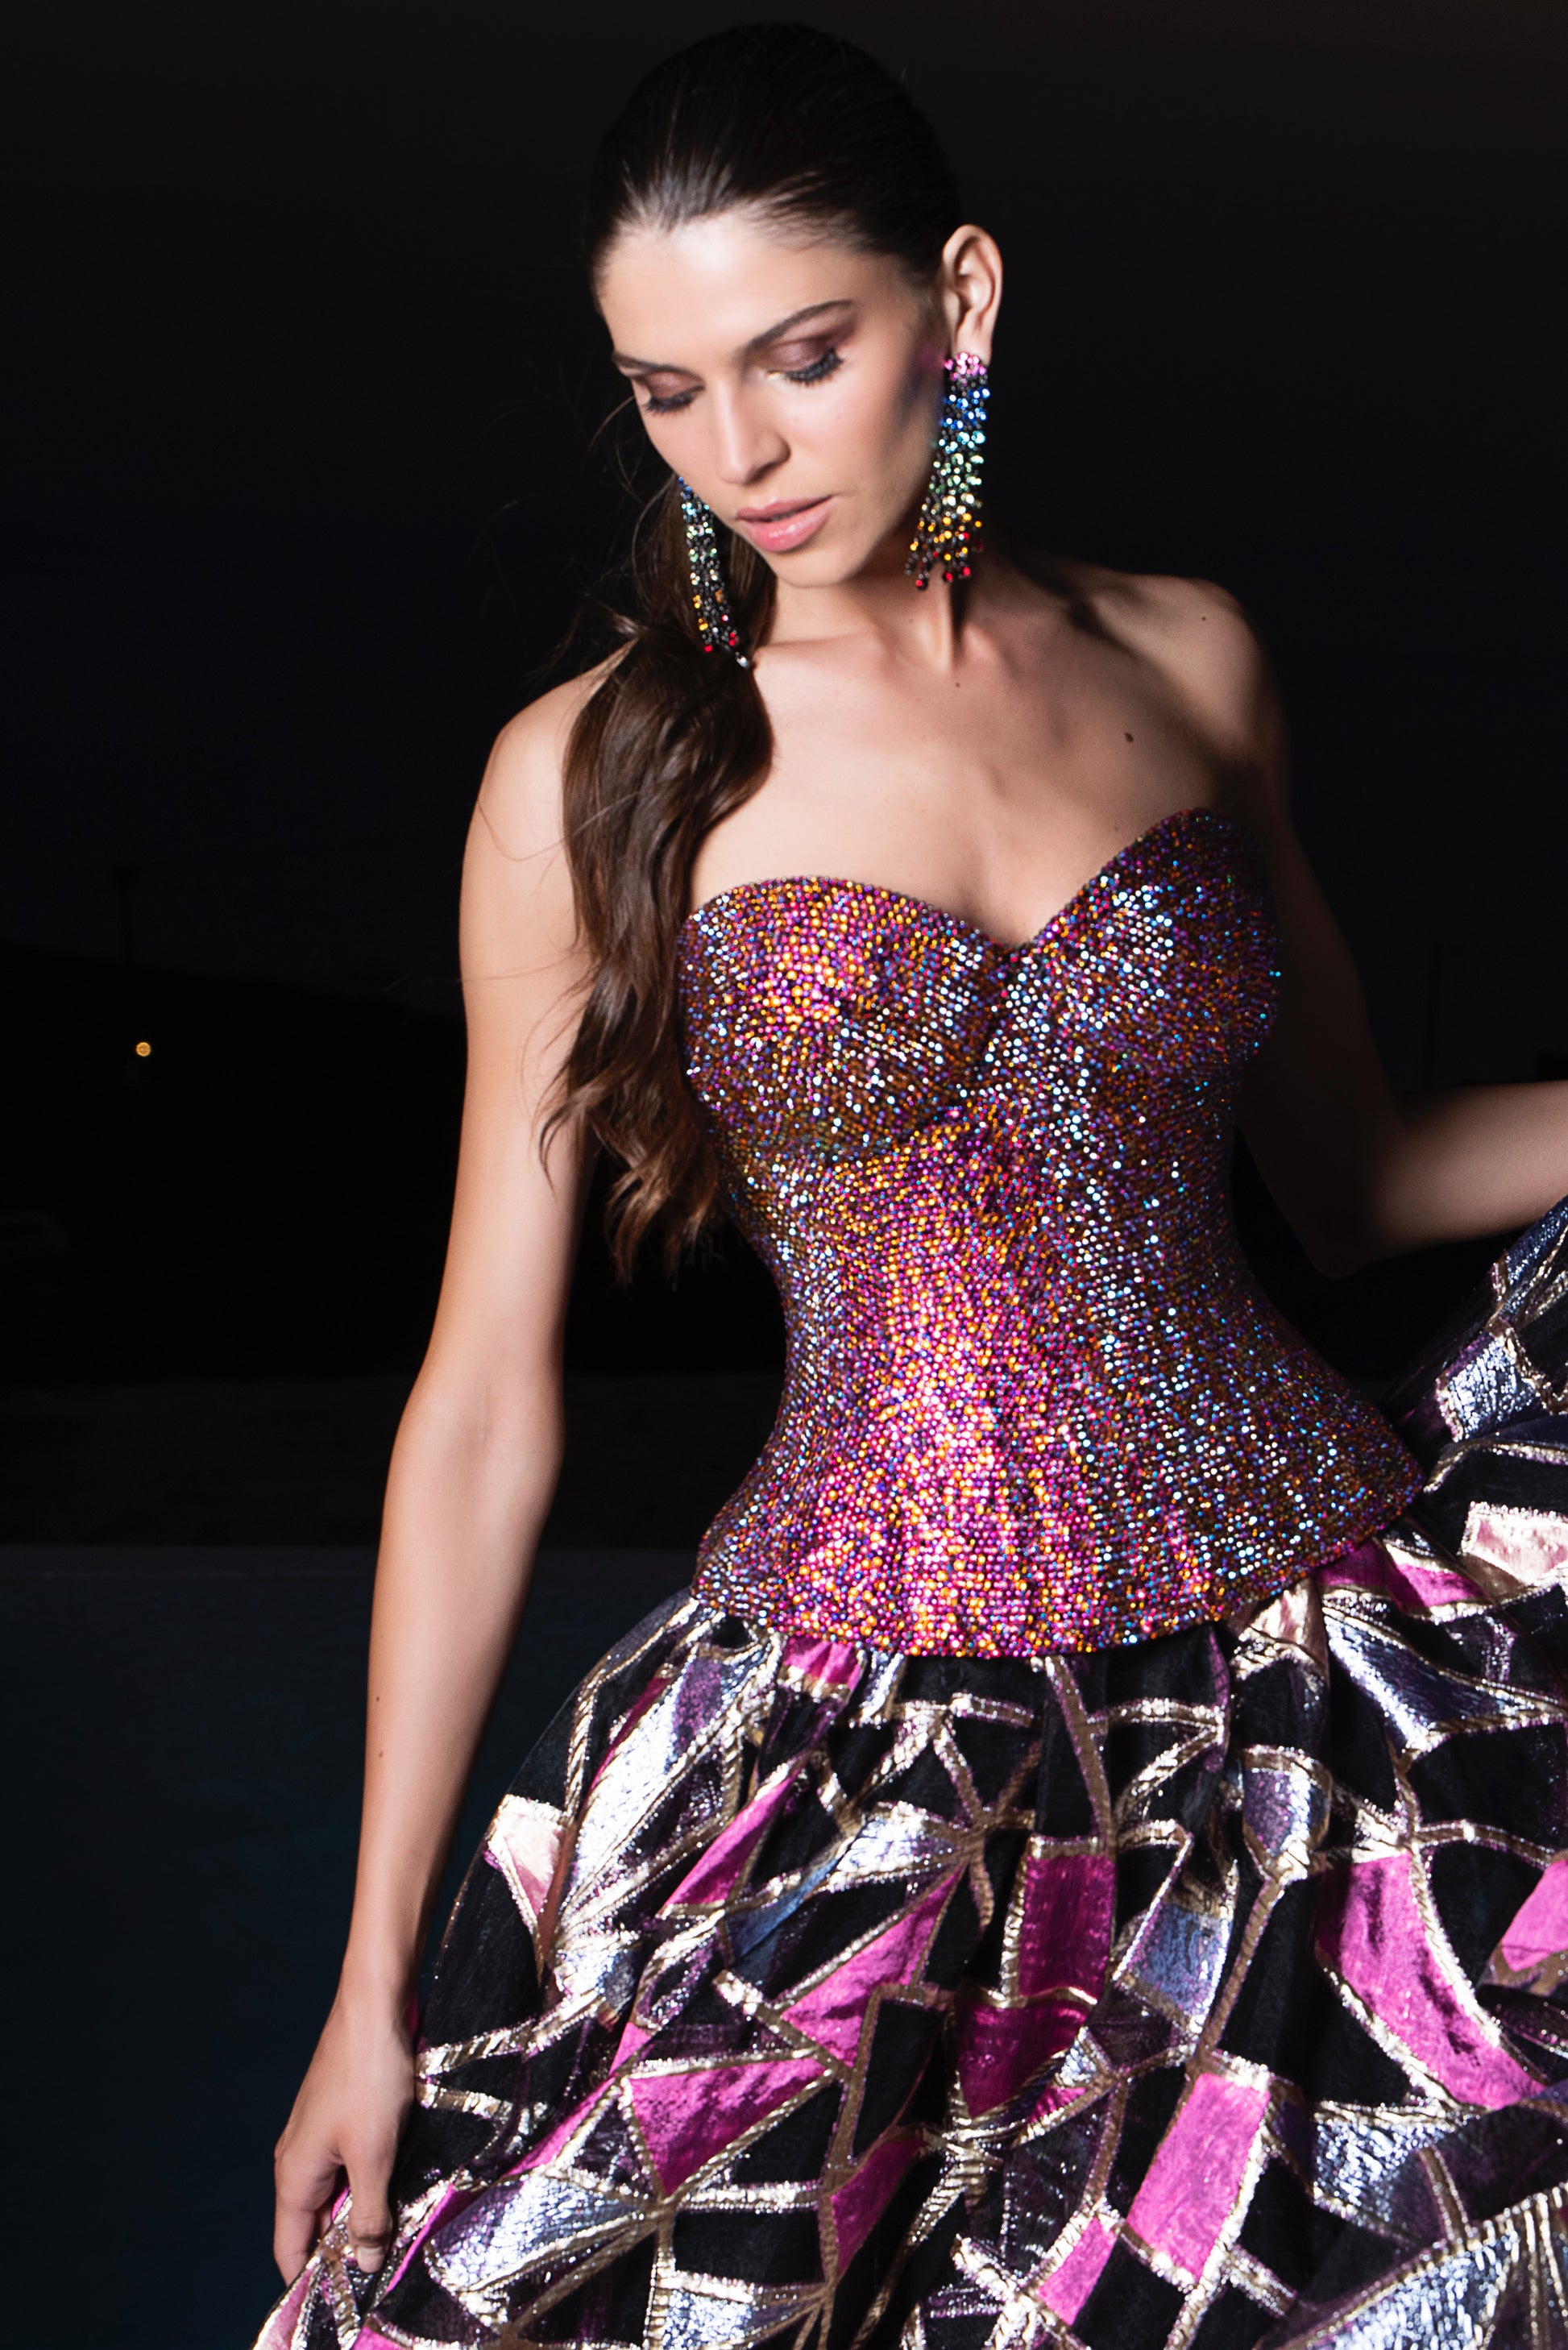 Close-up of a light-skinned female wearing a Swarovski crystal corset.